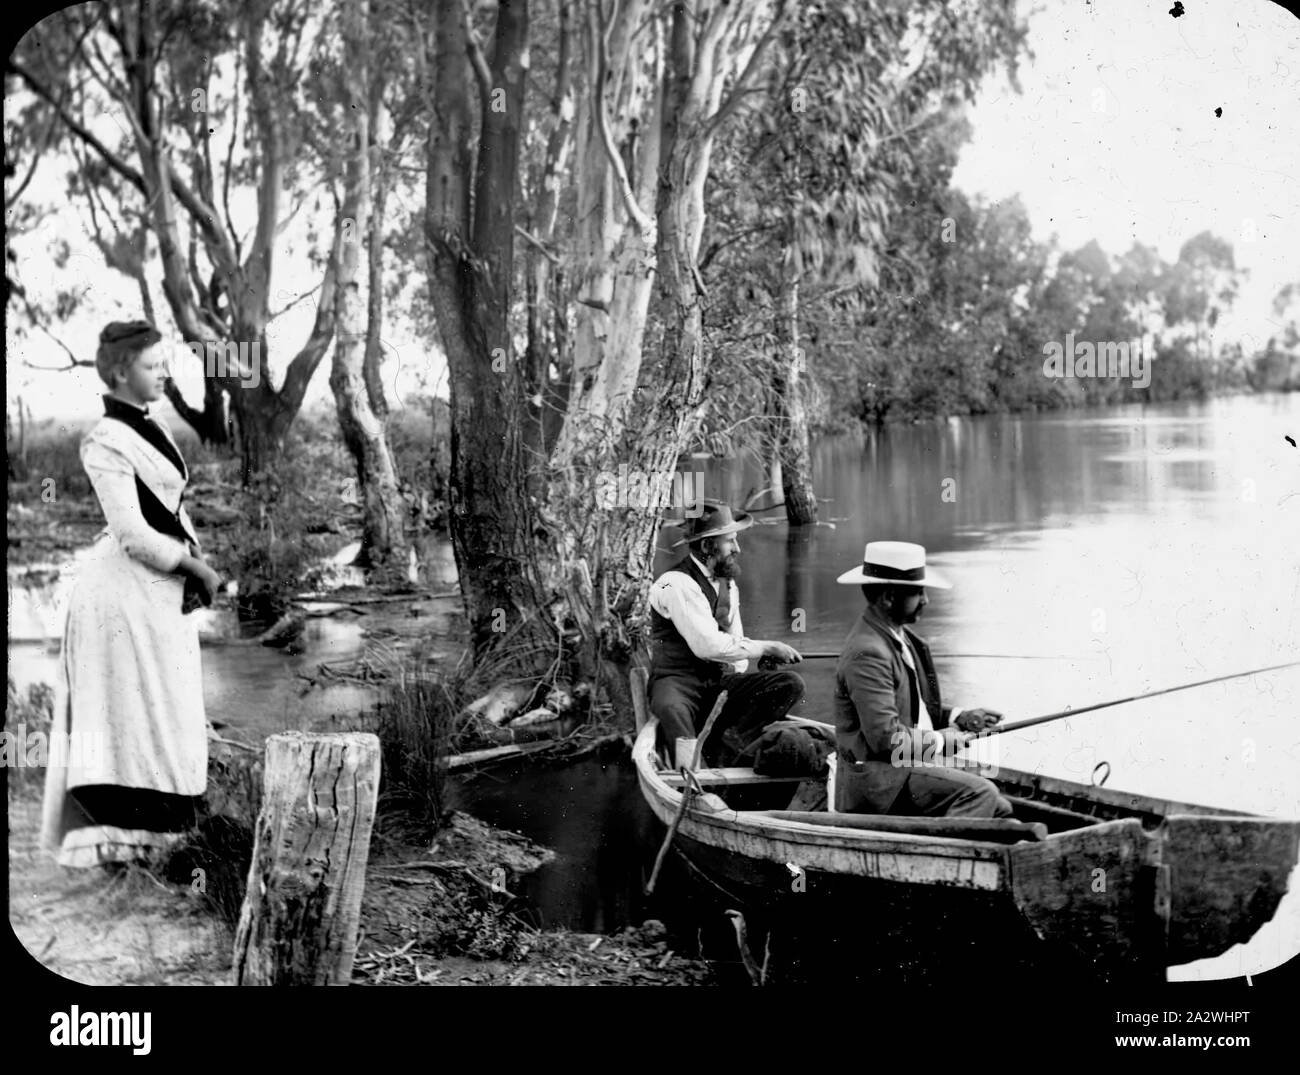 https://c8.alamy.com/comp/2A2WHPT/lantern-slide-fishing-in-river-victoria-australia-about-1890-black-and-white-image-of-aj-campbell-sitting-in-a-boat-without-a-jacket-on-while-he-and-a-friend-were-fishing-possibly-in-the-yarra-river-with-a-lady-standing-on-the-bank-looking-on-this-is-one-of-many-glass-lantern-slides-that-form-the-aj-campbell-collection-held-by-museums-victoria-2A2WHPT.jpg